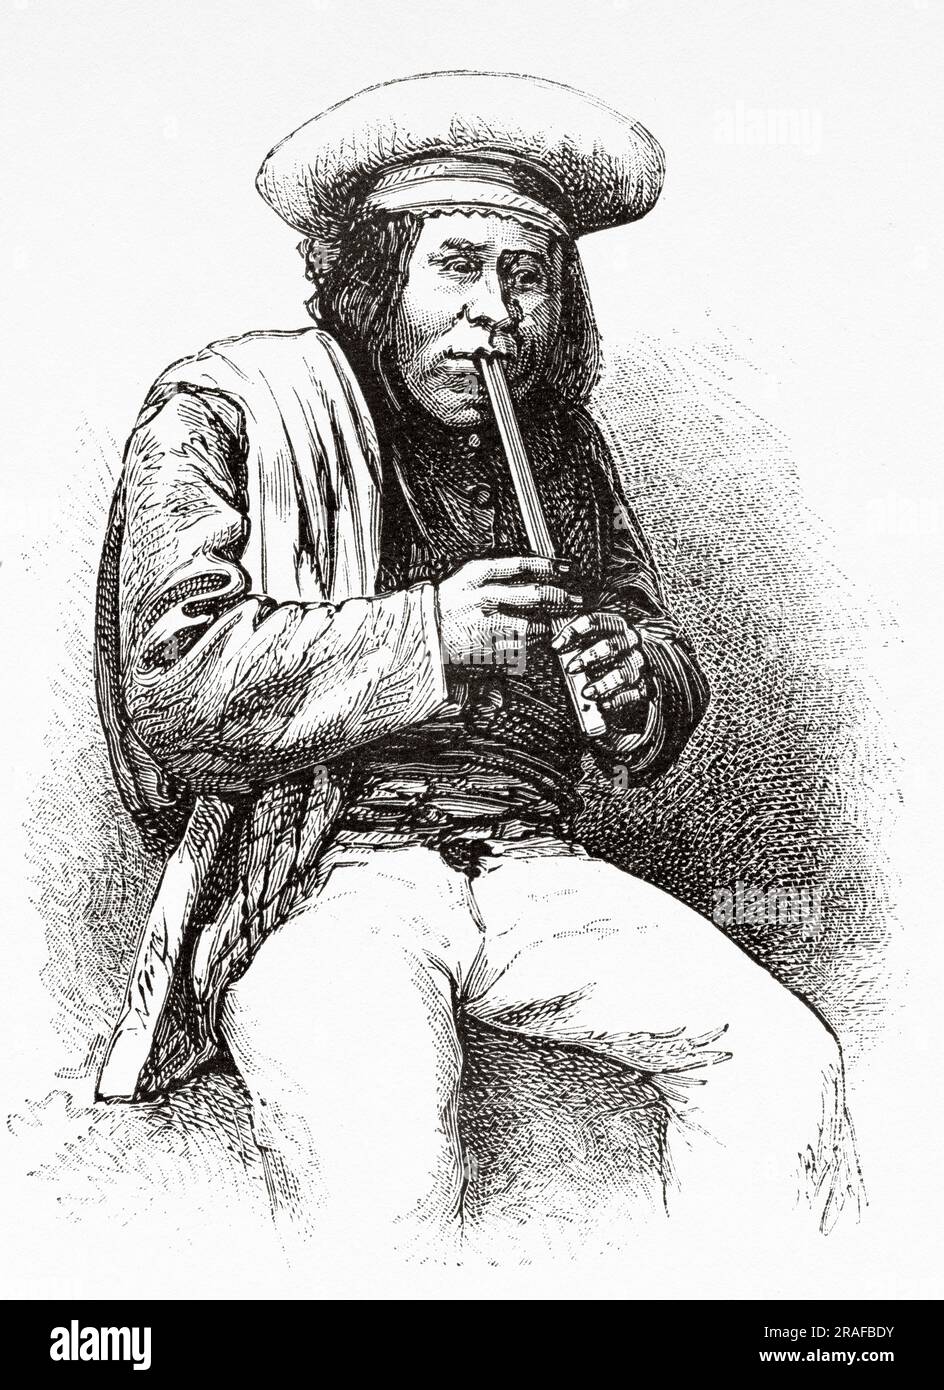 Mestizo man from the outskirts of the city of La Paz playing a traditional Bolivian flute, Bolivia, South America. Journey in search of the remains of the Crevaux mission by Émile-Arthur Thouar 1884. Old 19th century engraving from Le Tour du Monde 1906 Stock Photo